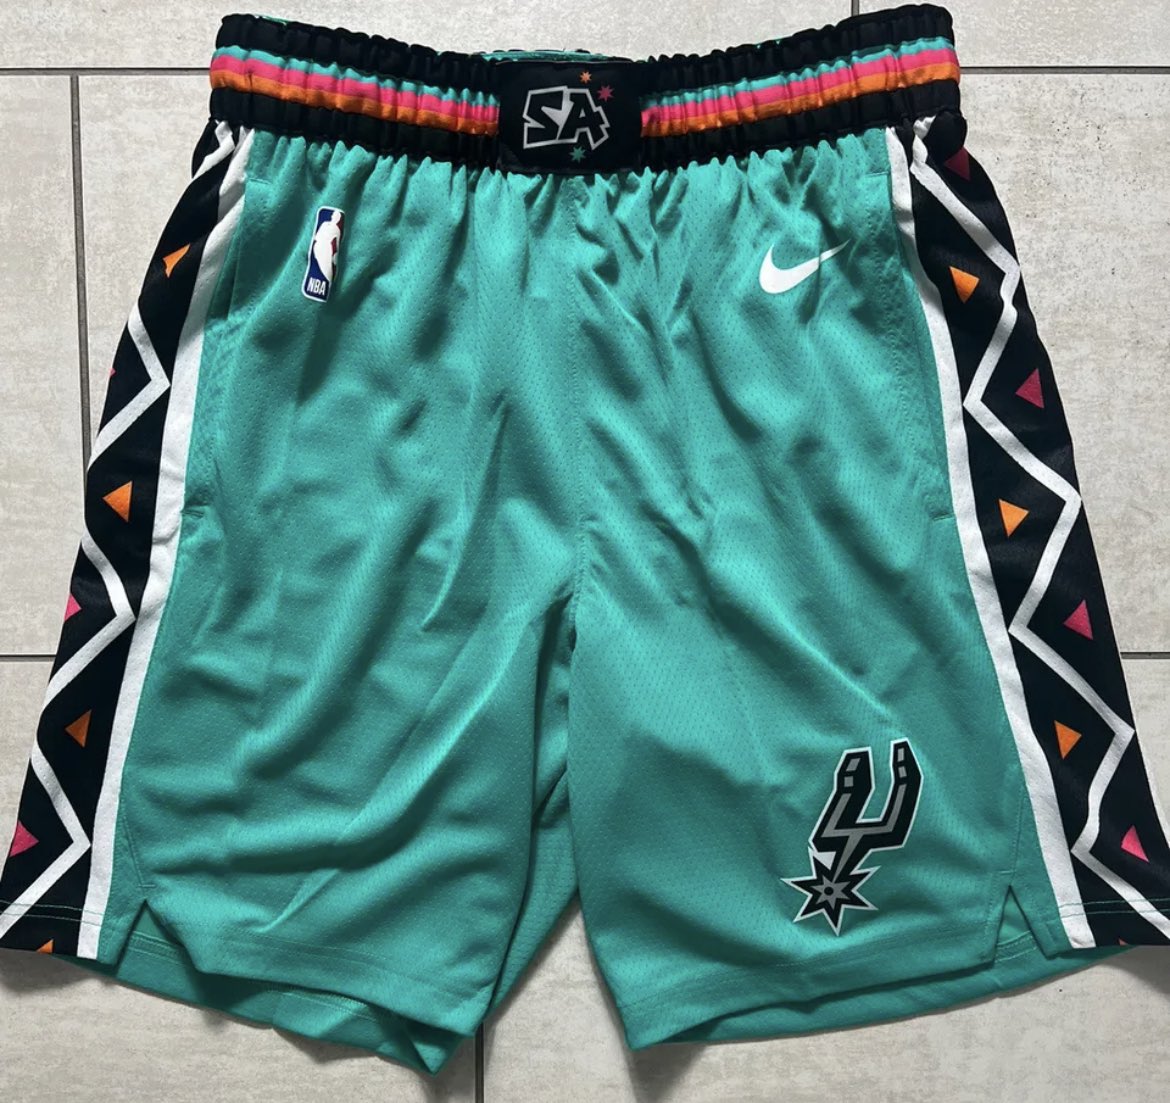 San Antonio Spurs Basketball Shorts – Jerseys and Sneakers